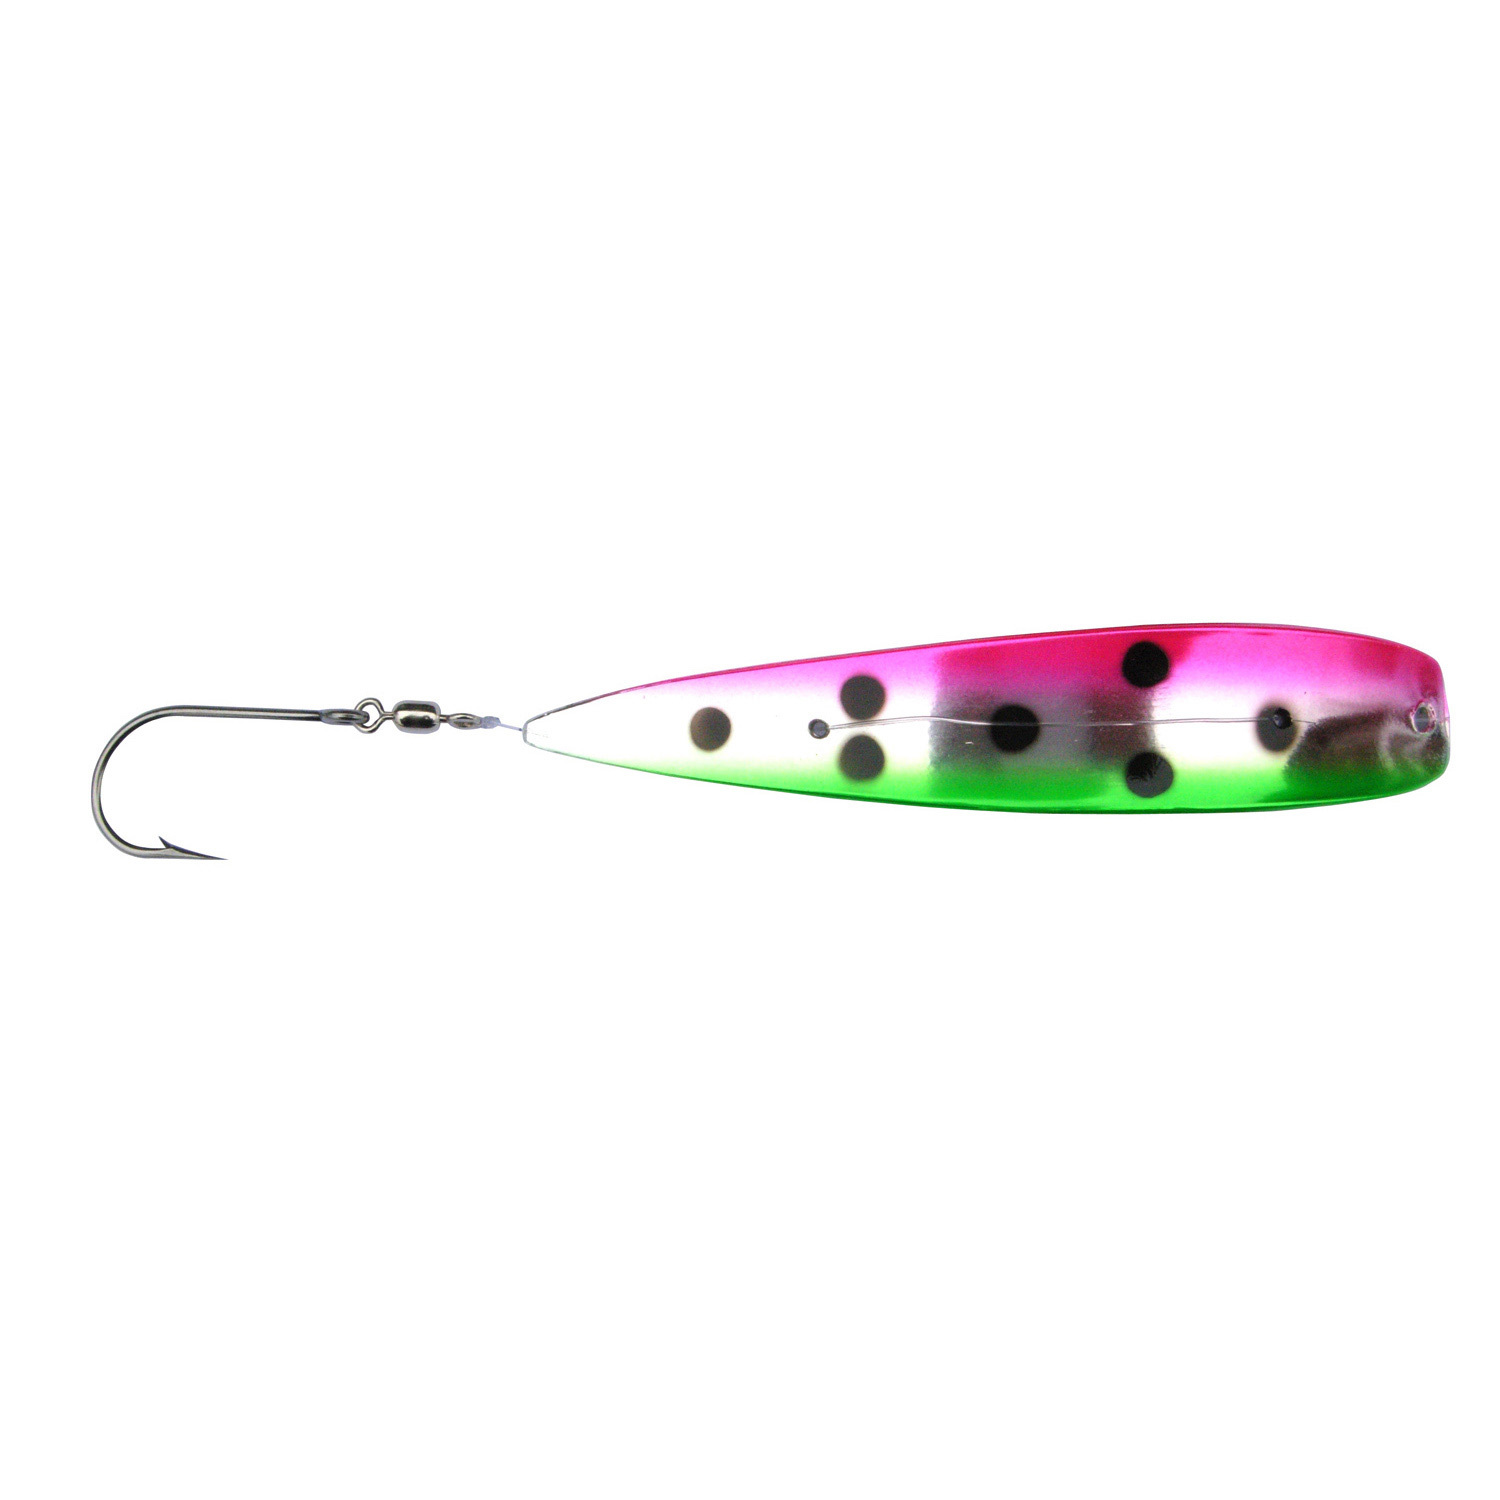 HOT SPOT LURES Apex® Fishing Lure, 4 1/2